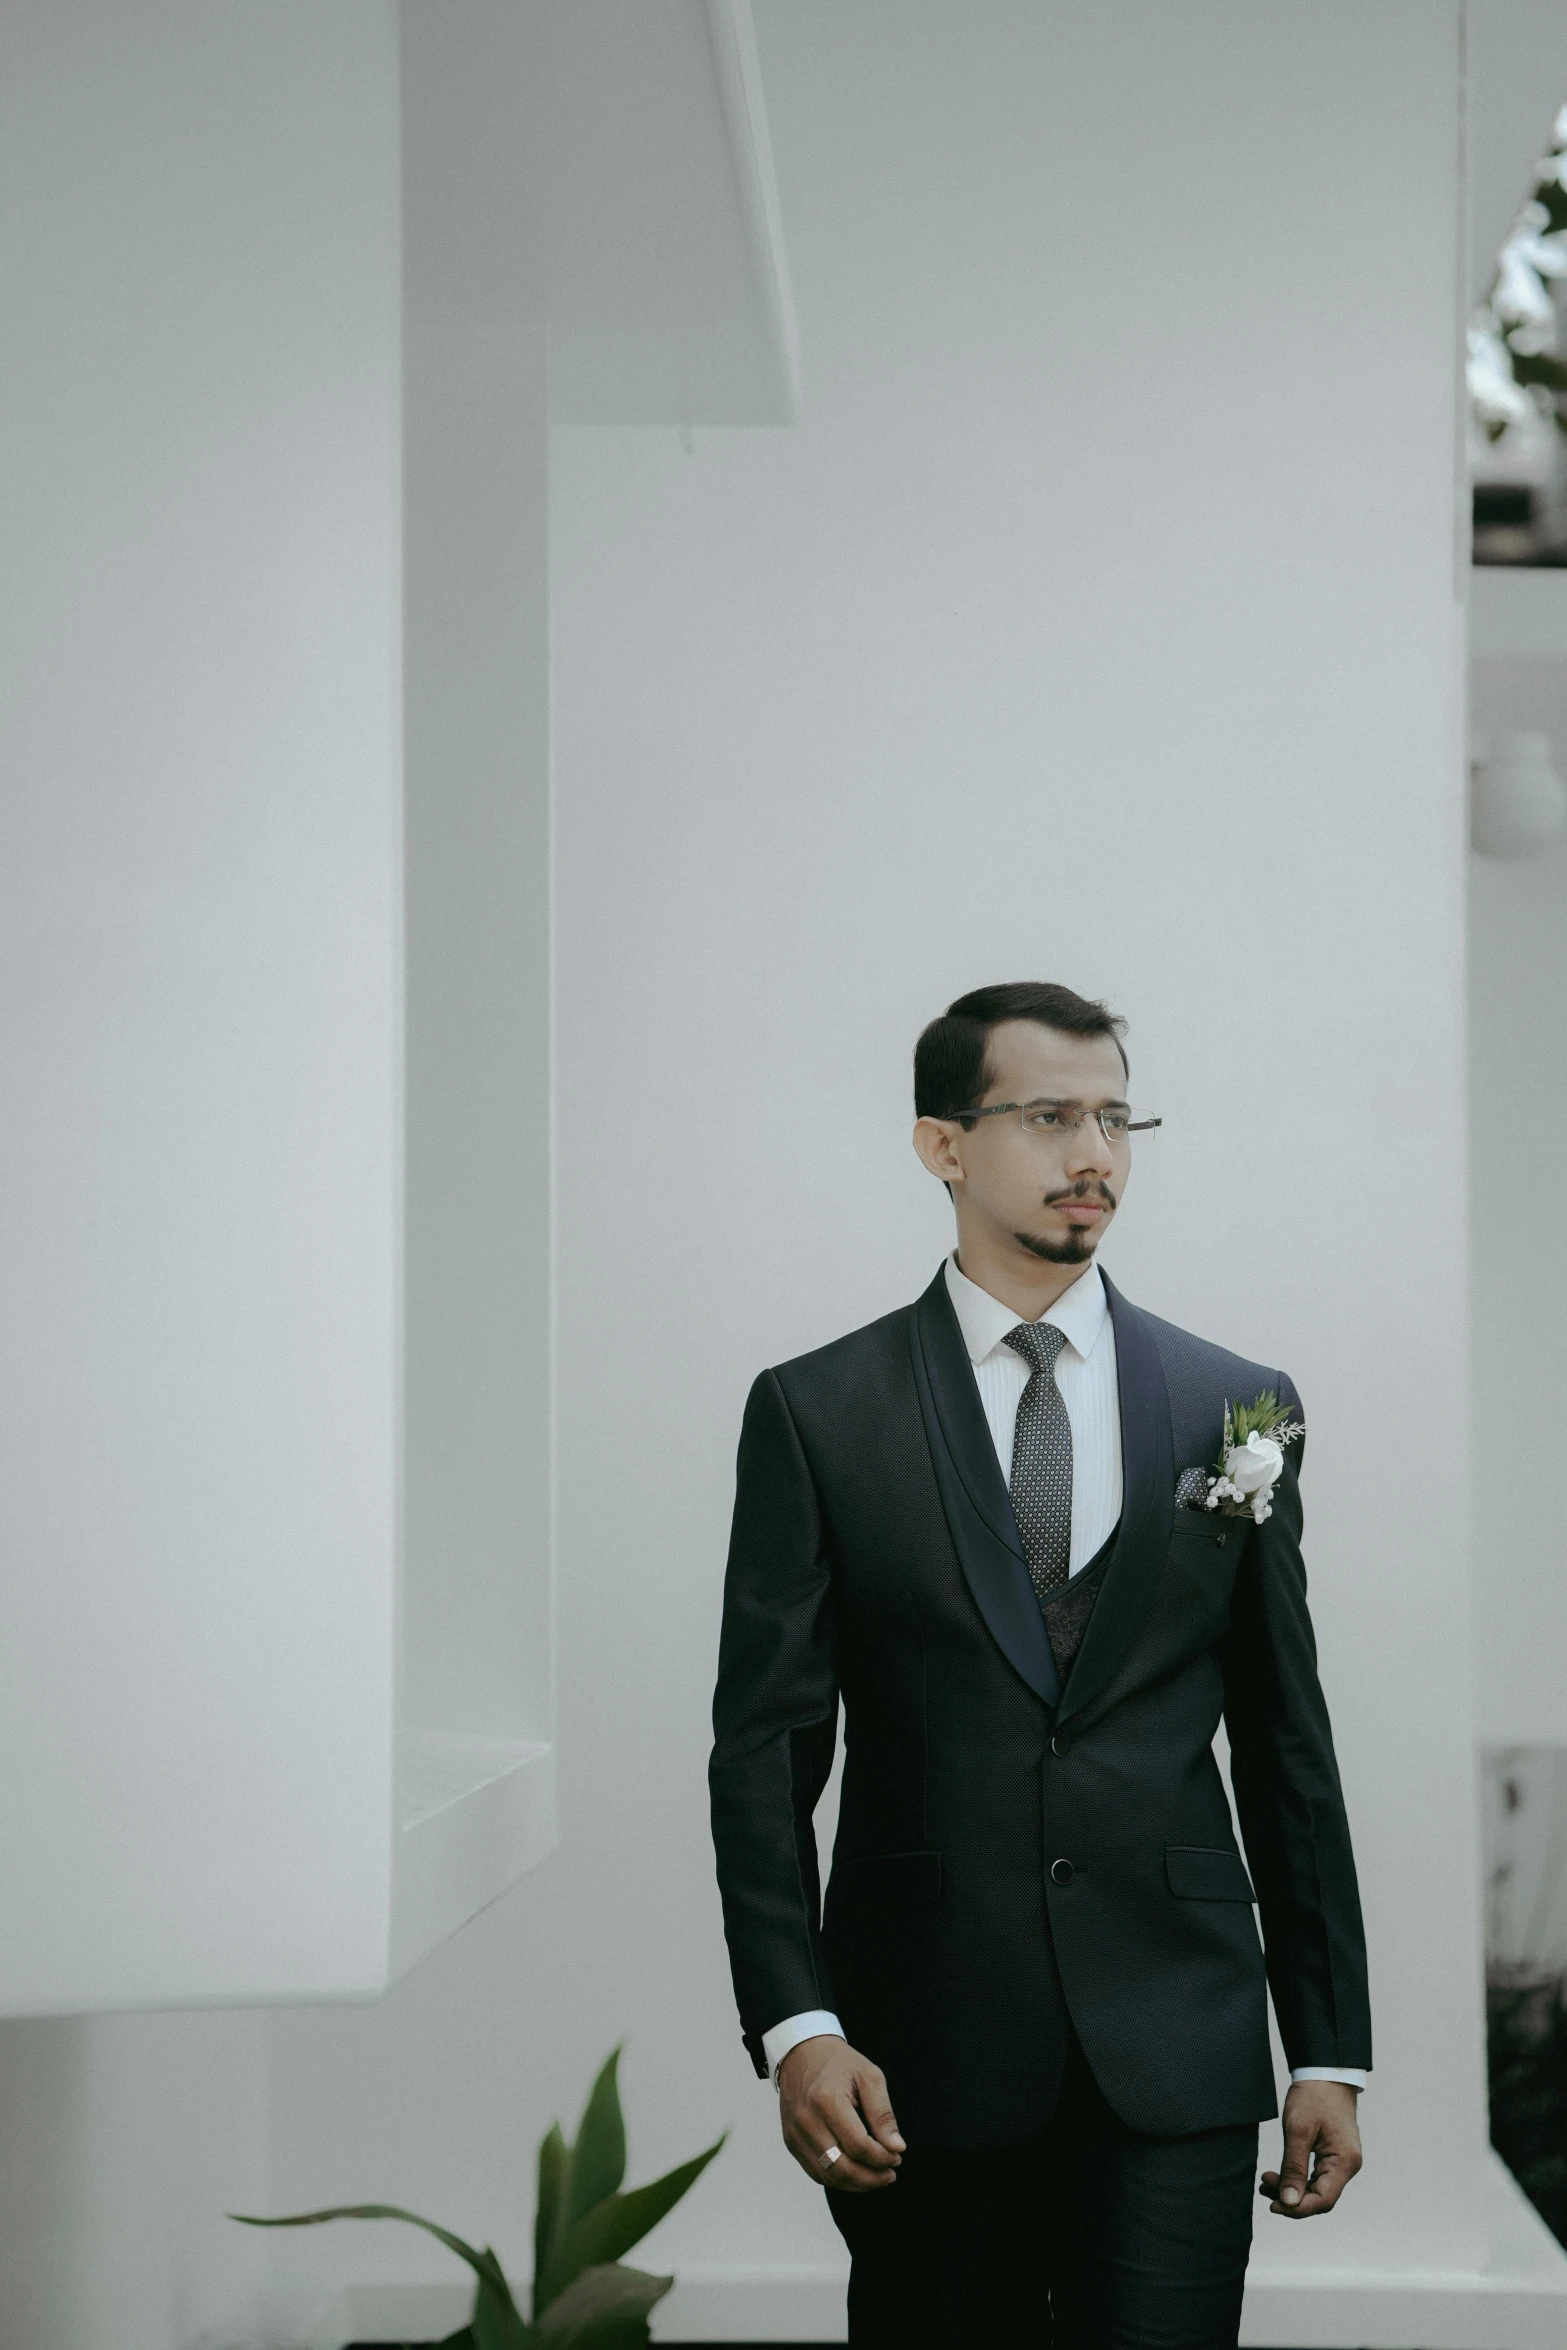 man standing in a room holding a flower and wearing a suit